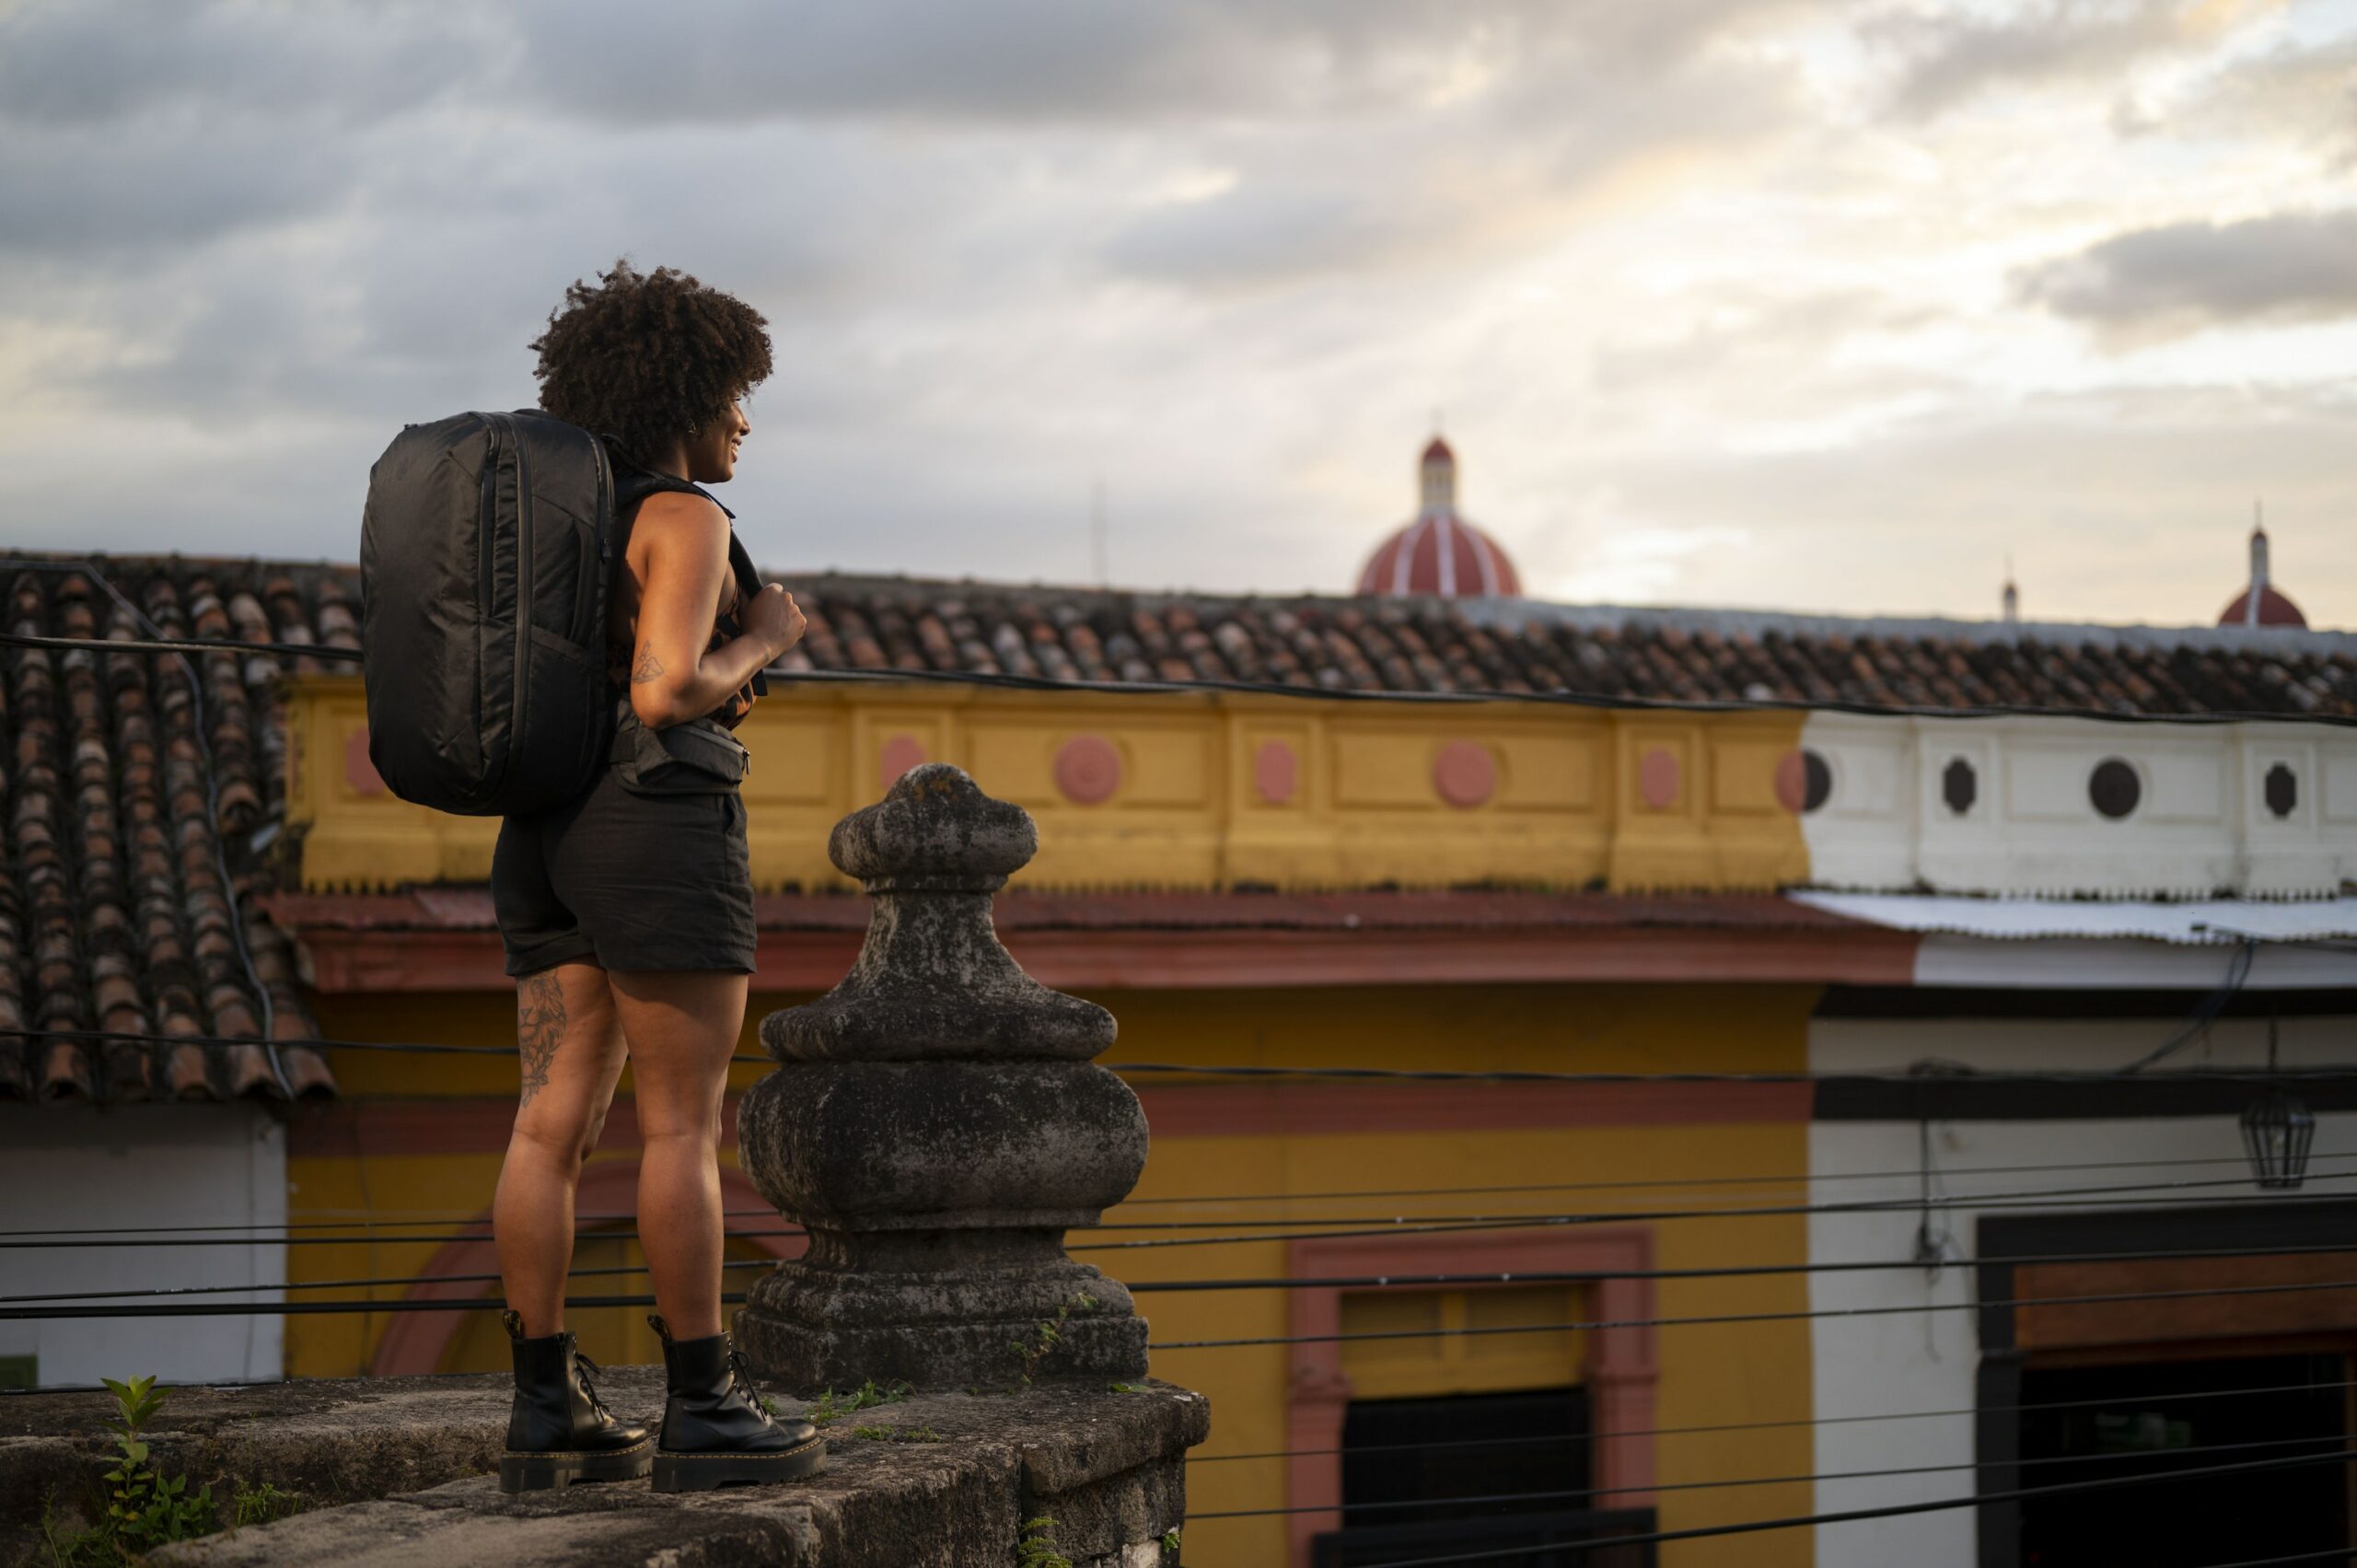 Woman wearing a backpack looking out over roofs